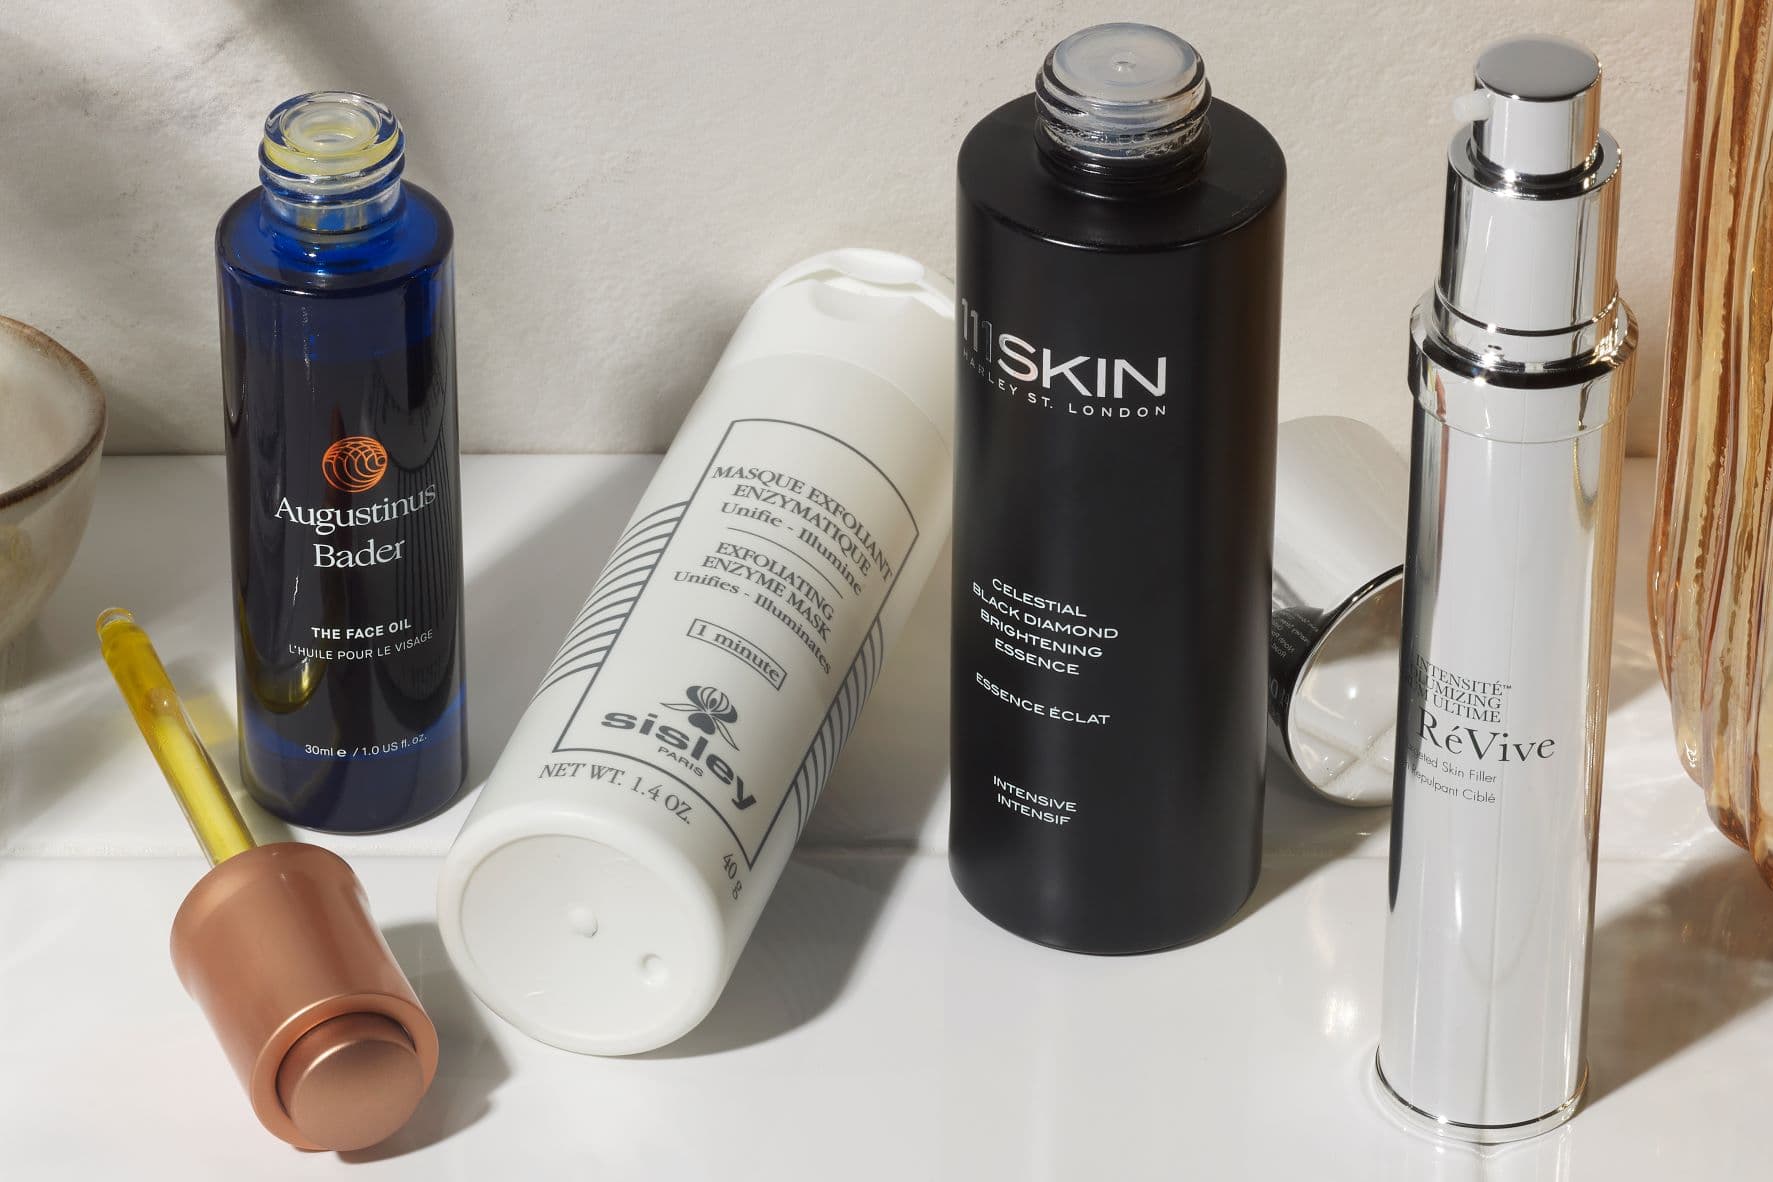 Black Friday Beauty and Skincare Deals at Space NK